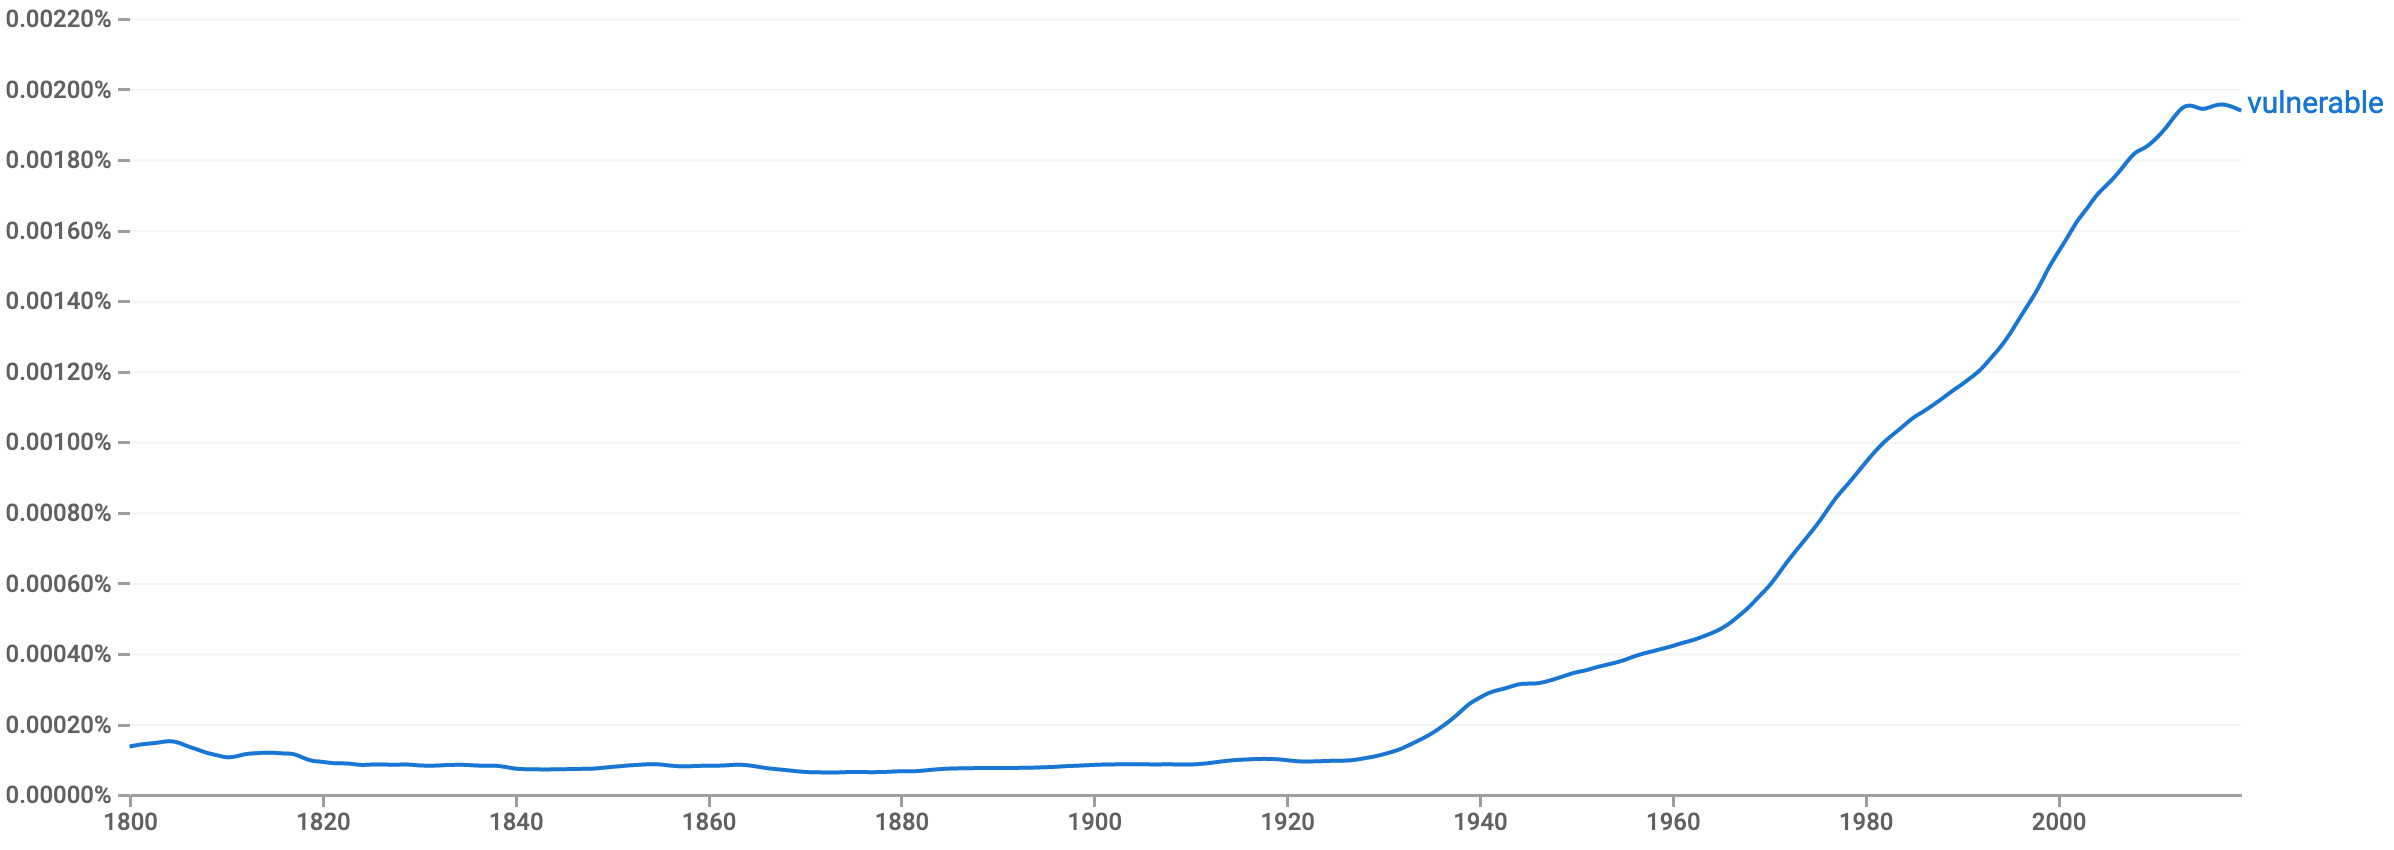 Screenshot of Google Ngram Viewer showing usage over time of the word "vulnerable".